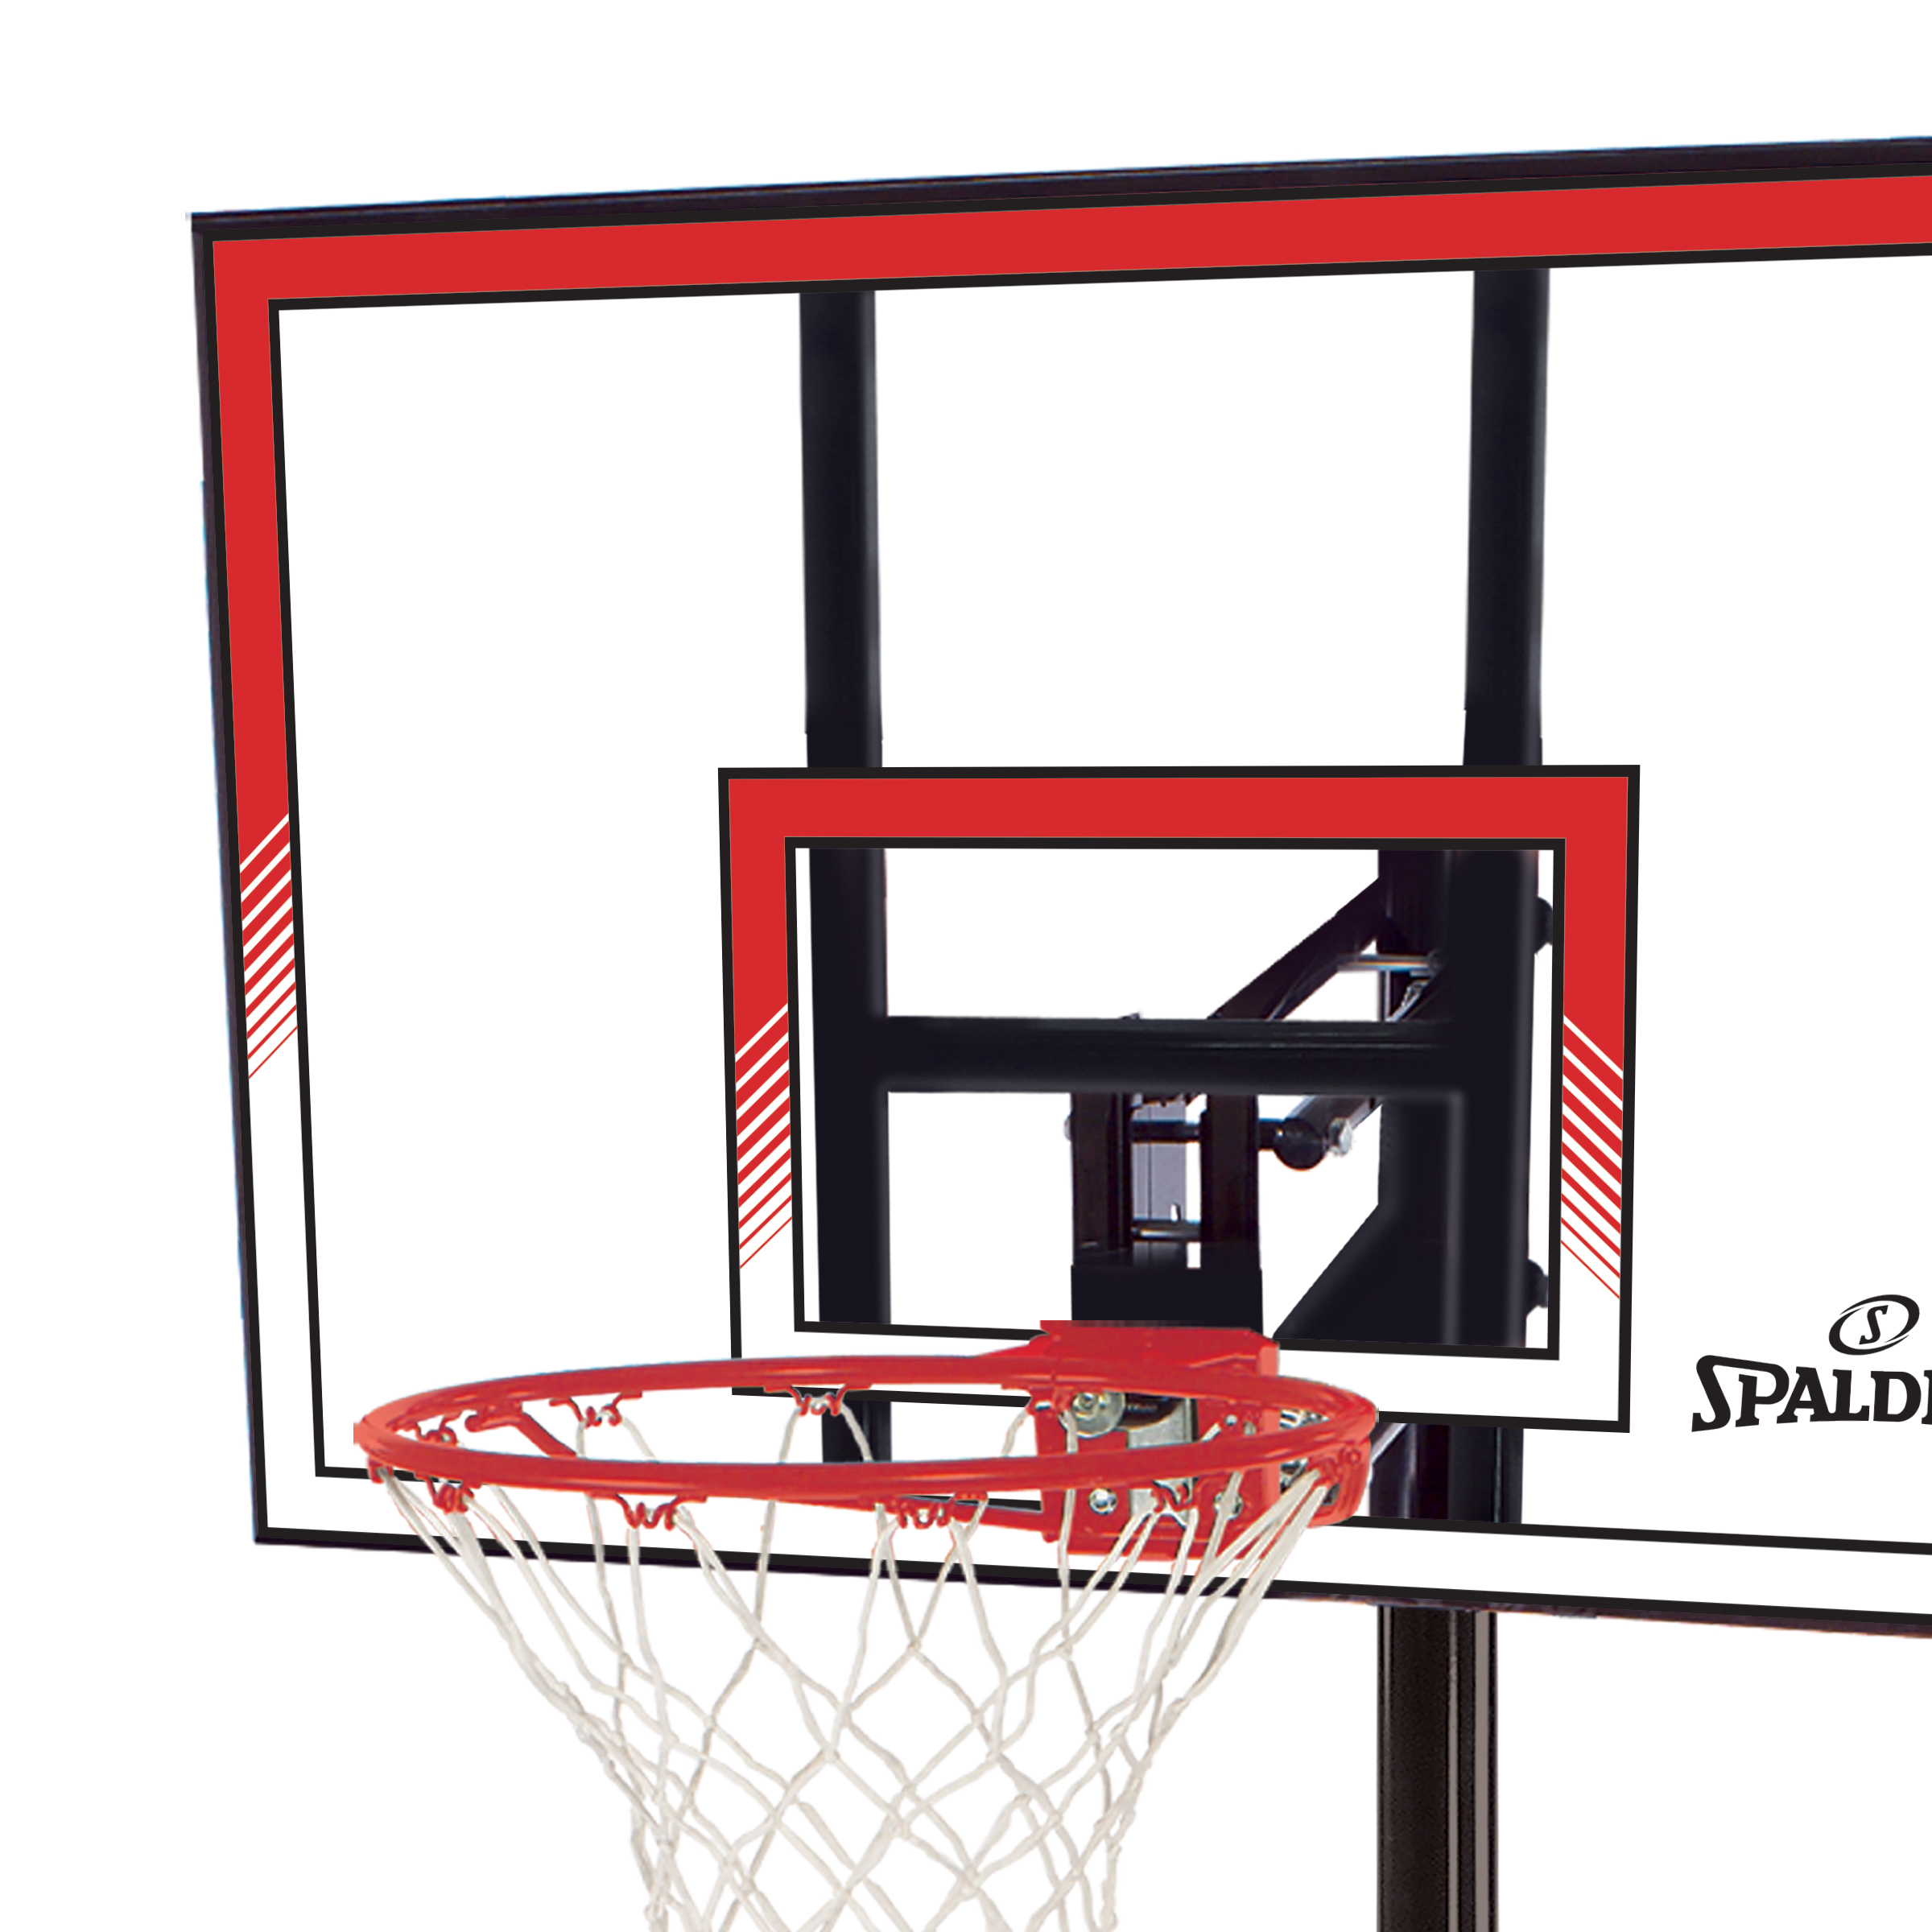 Spalding Ratchet Lift 44 In. Polycarbonate Portable Basketball Hoop System - image 3 of 6